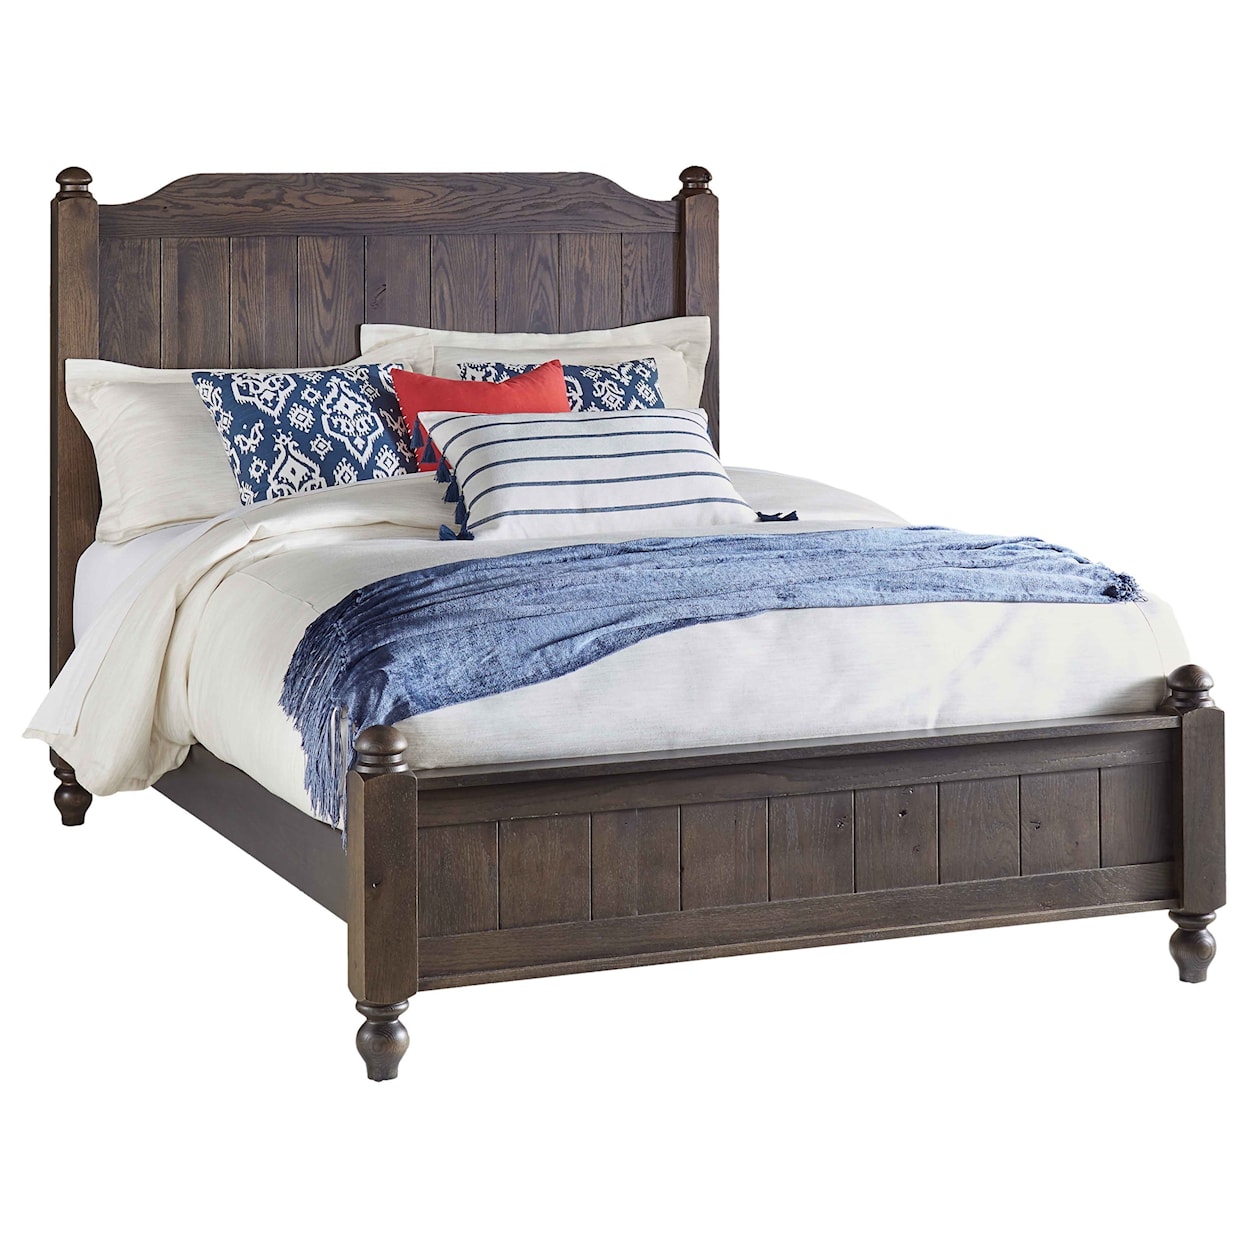 Daniel's Amish Homestead Queen Post Frame Bed